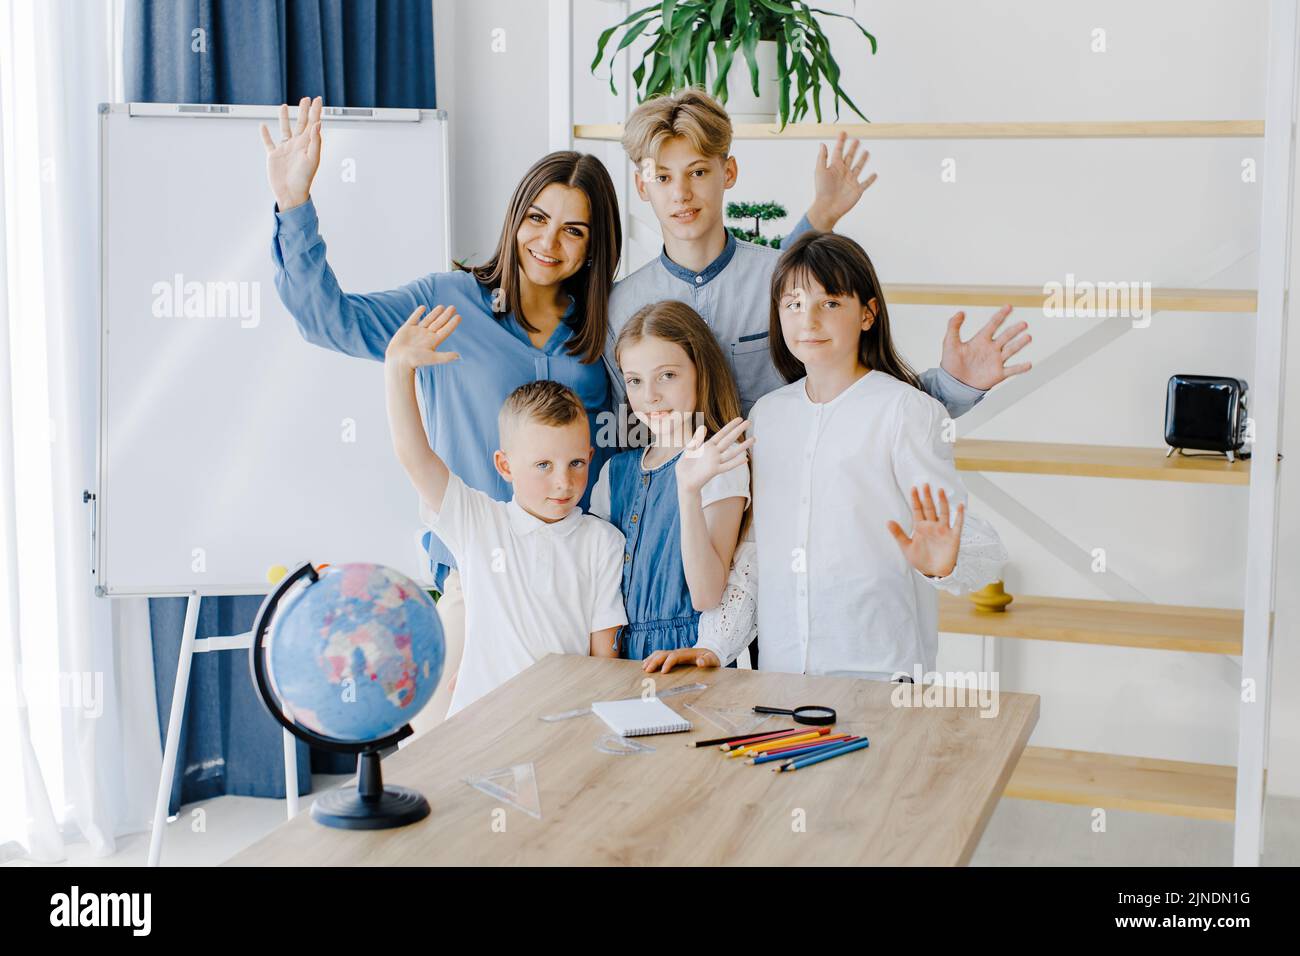 A teacher and schoolchildren of different ages stand in a spacious classroom and smile, looking into the camera. Learning concept Stock Photo